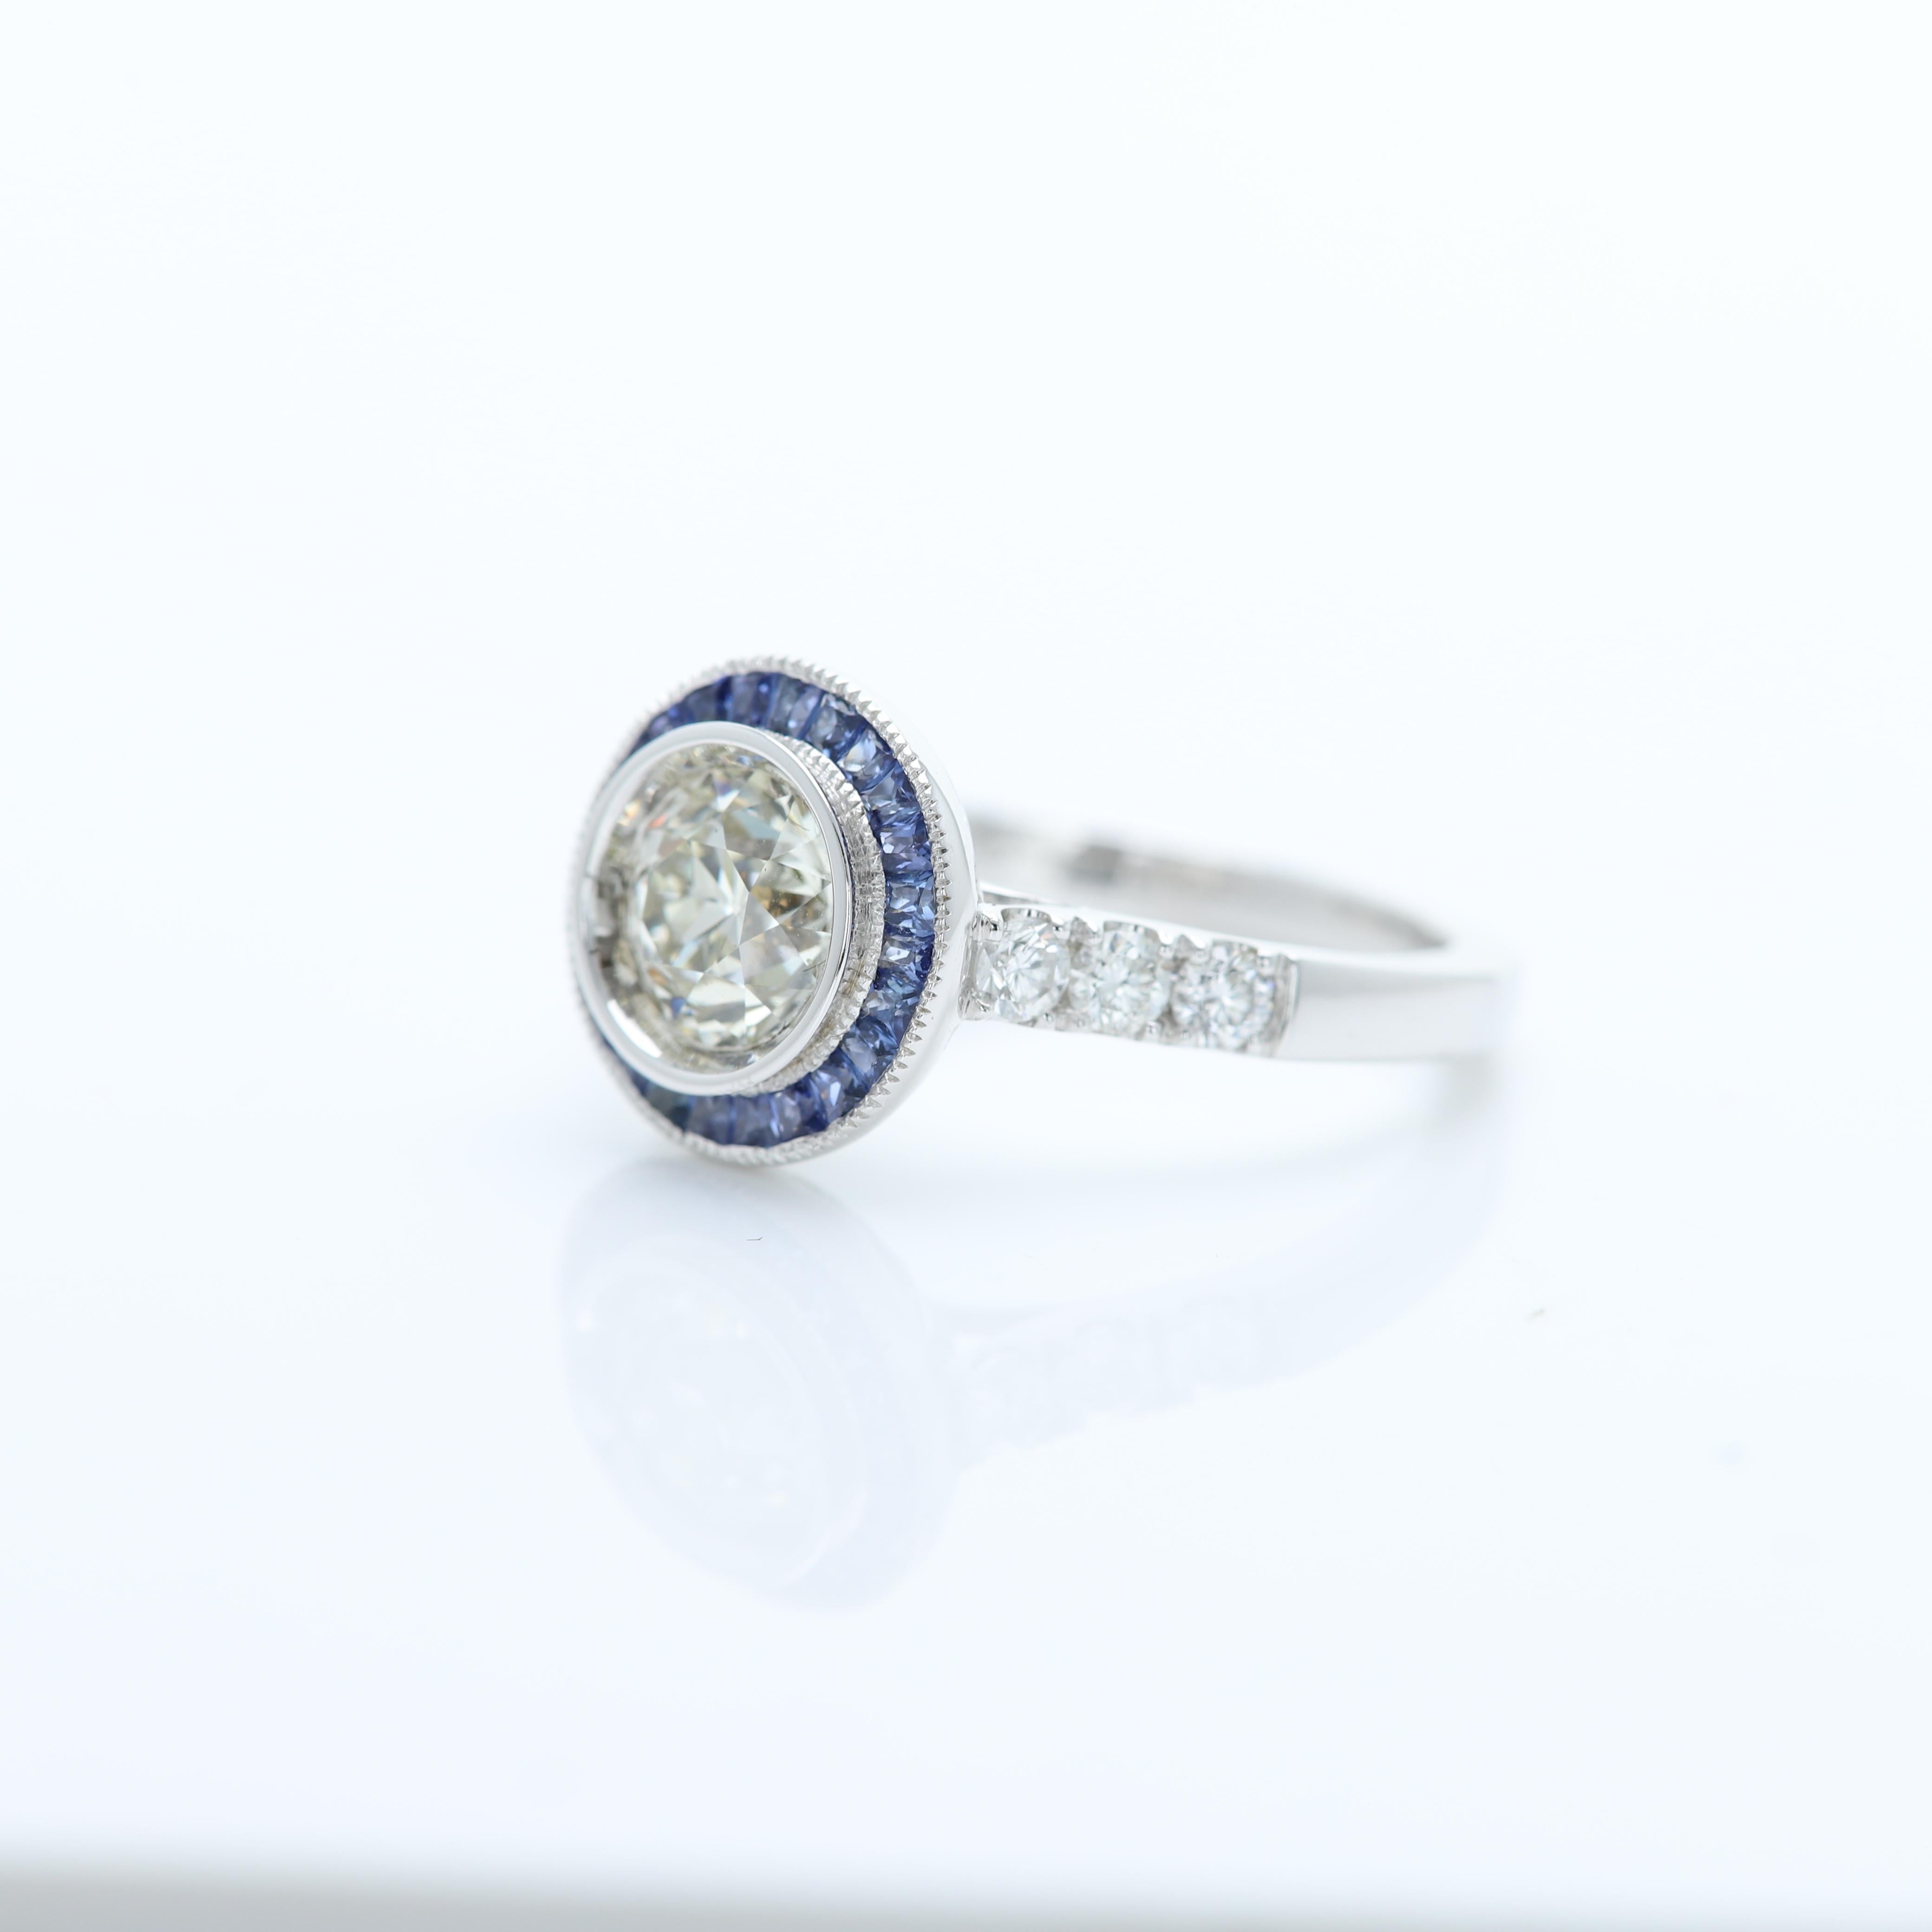 Round Diamond 1.25 Carat & Blue Sapphire Ring Art Deco Style 18 Karat White Gold In New Condition For Sale In Brooklyn, NY